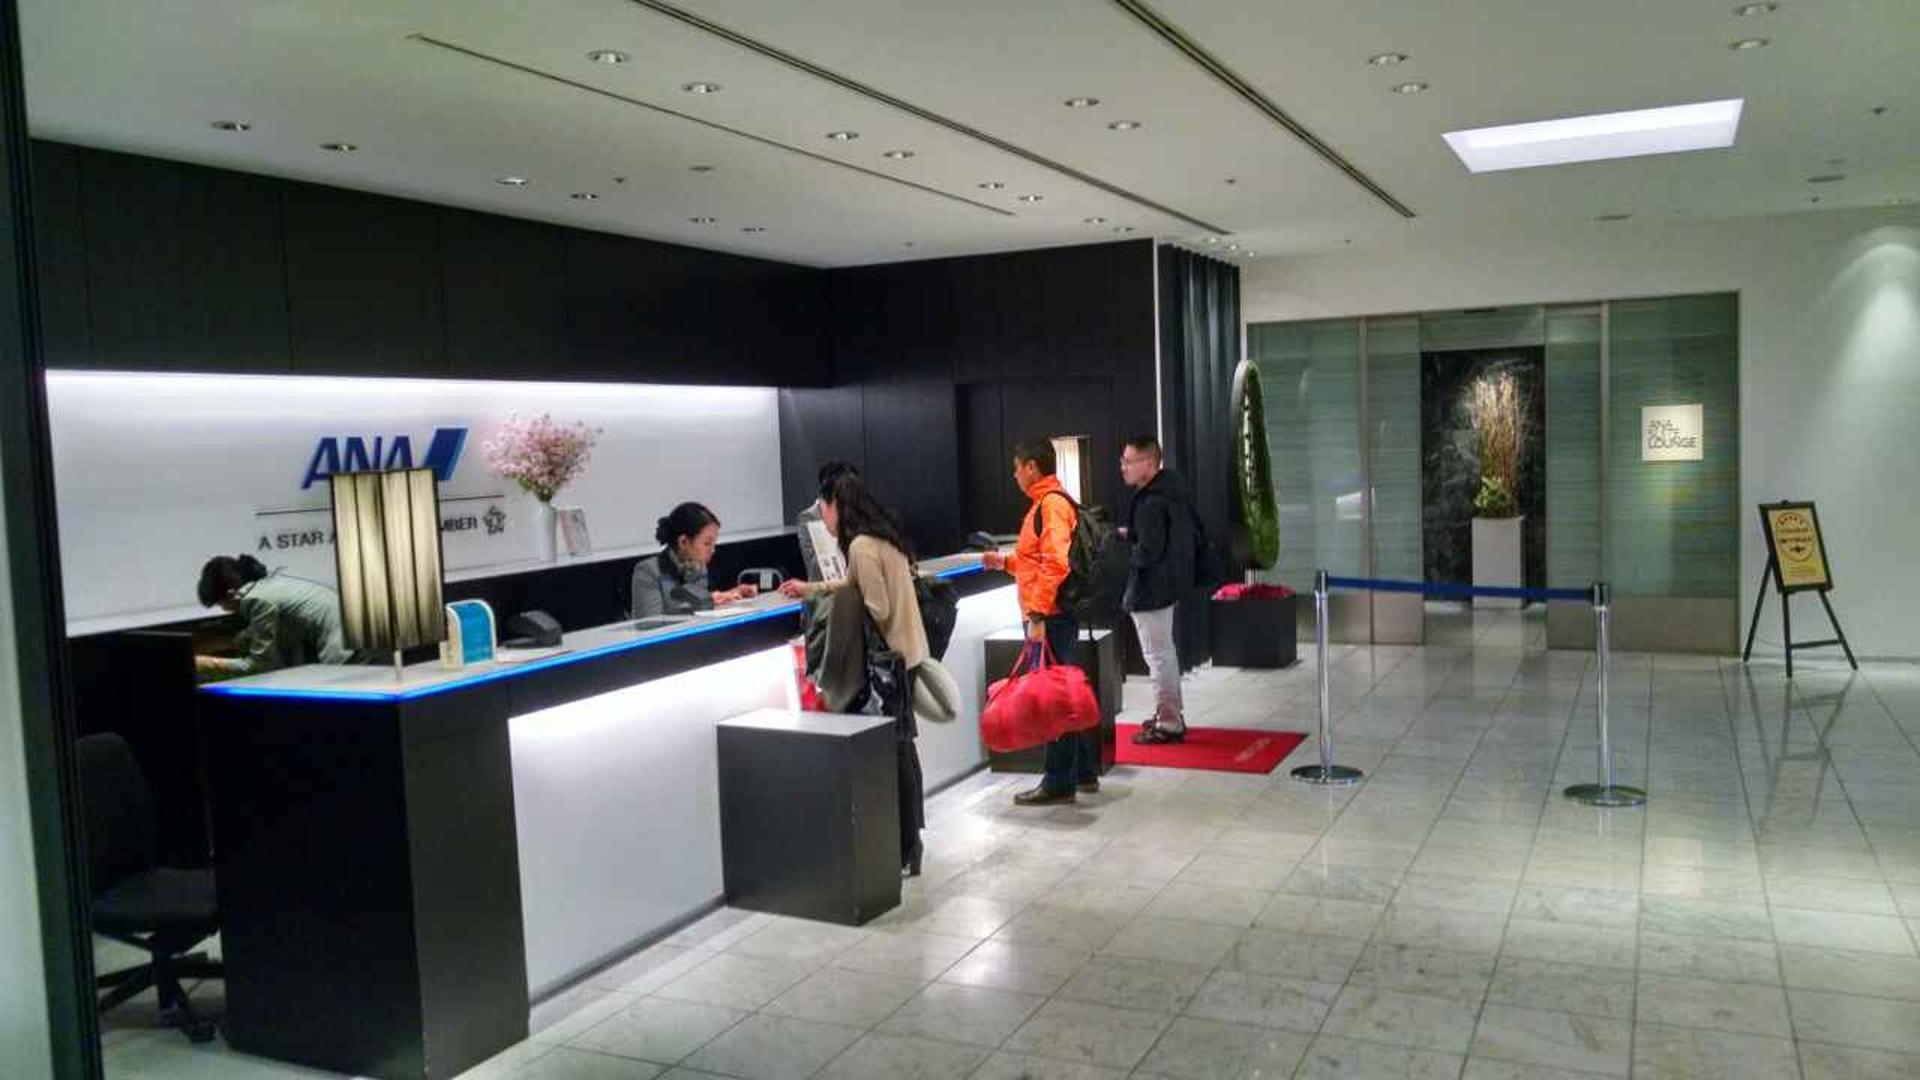 All Nippon Airways ANA Lounge image 38 of 39